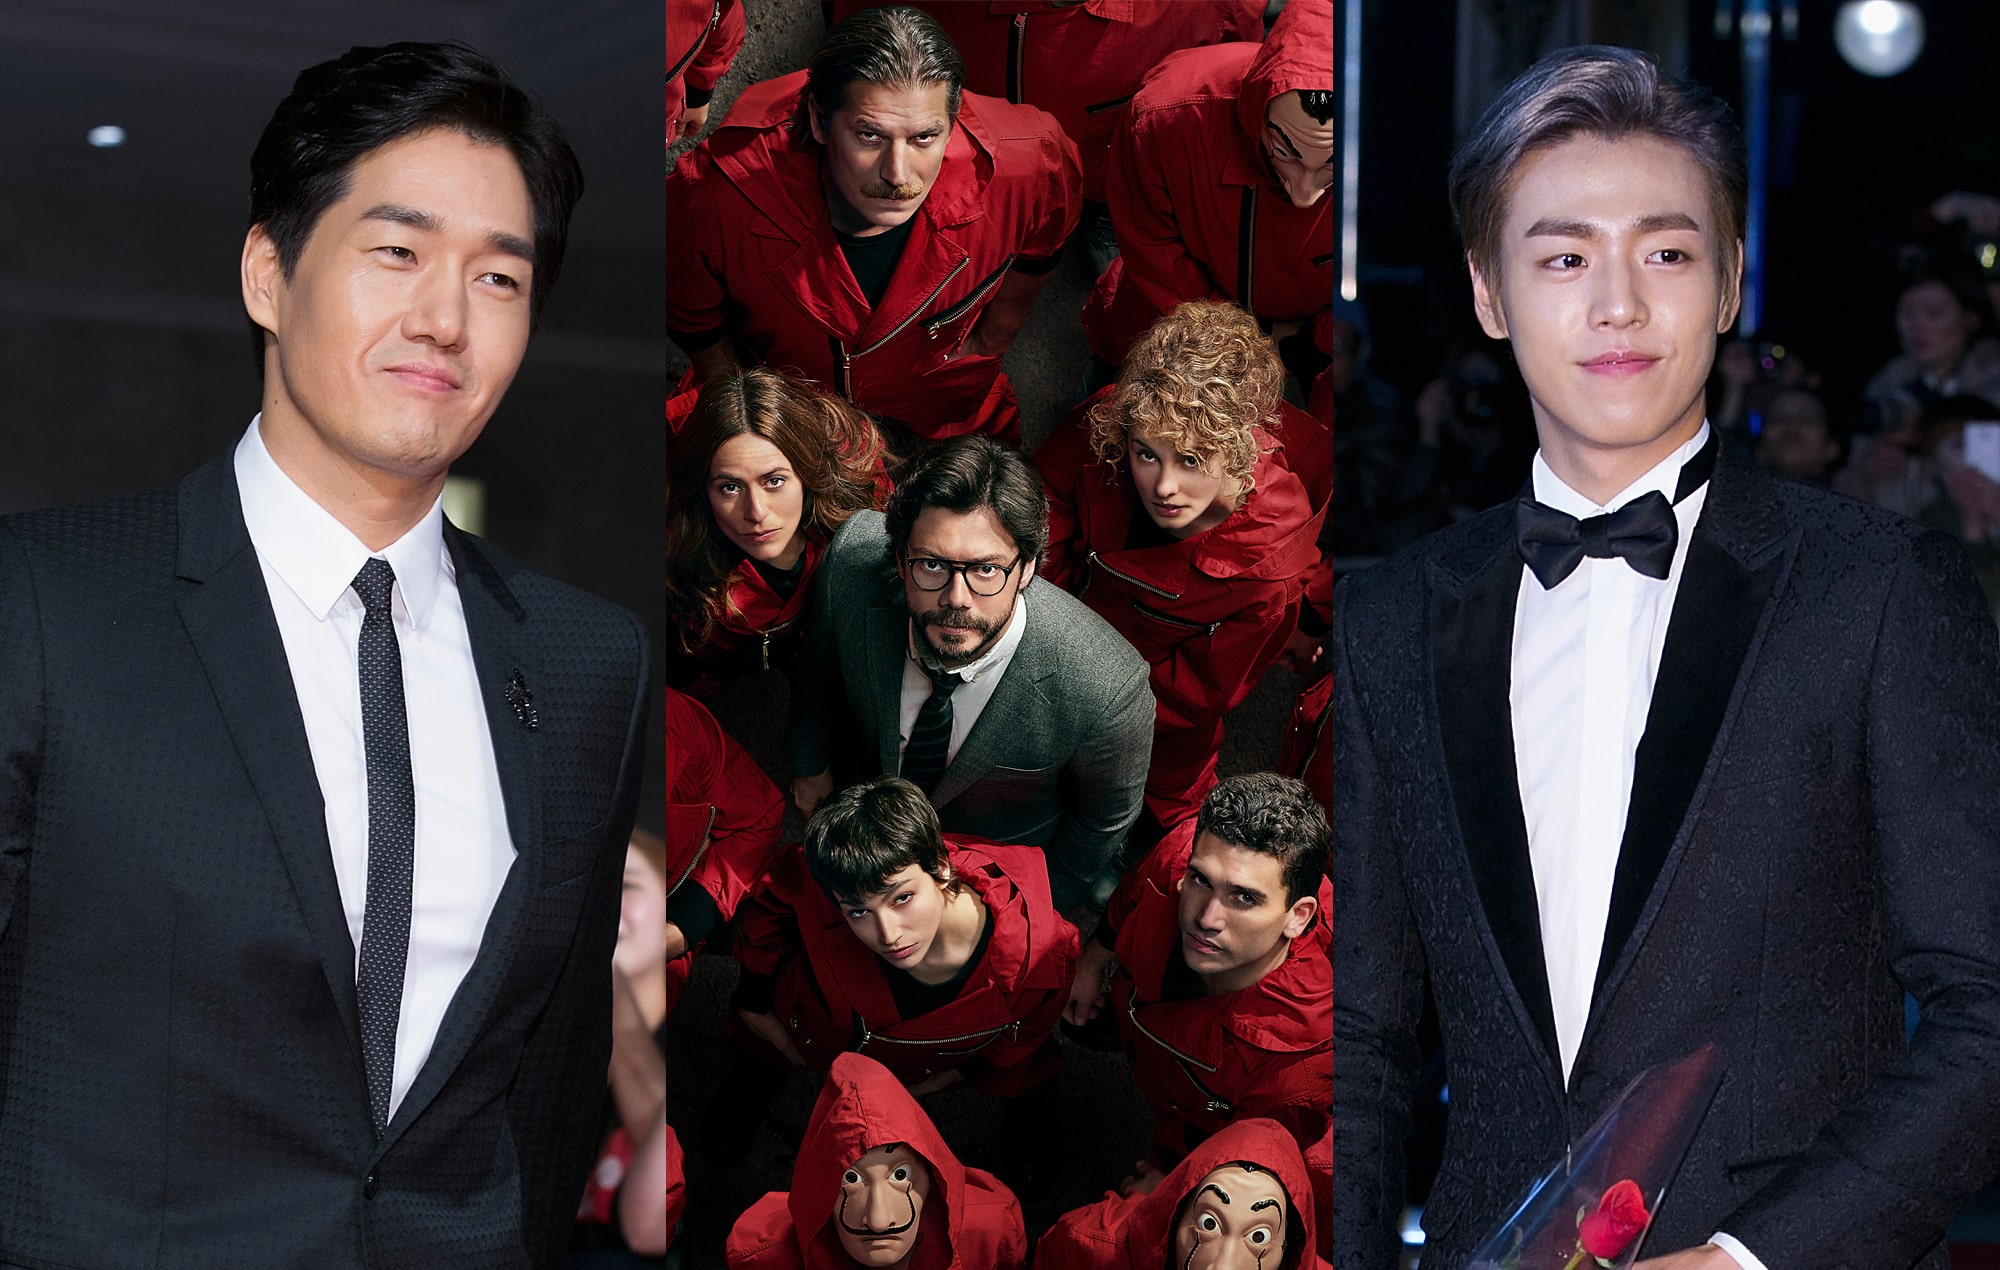 Money Heist' Korean remake: cast, plot details, release date and everything we know so far